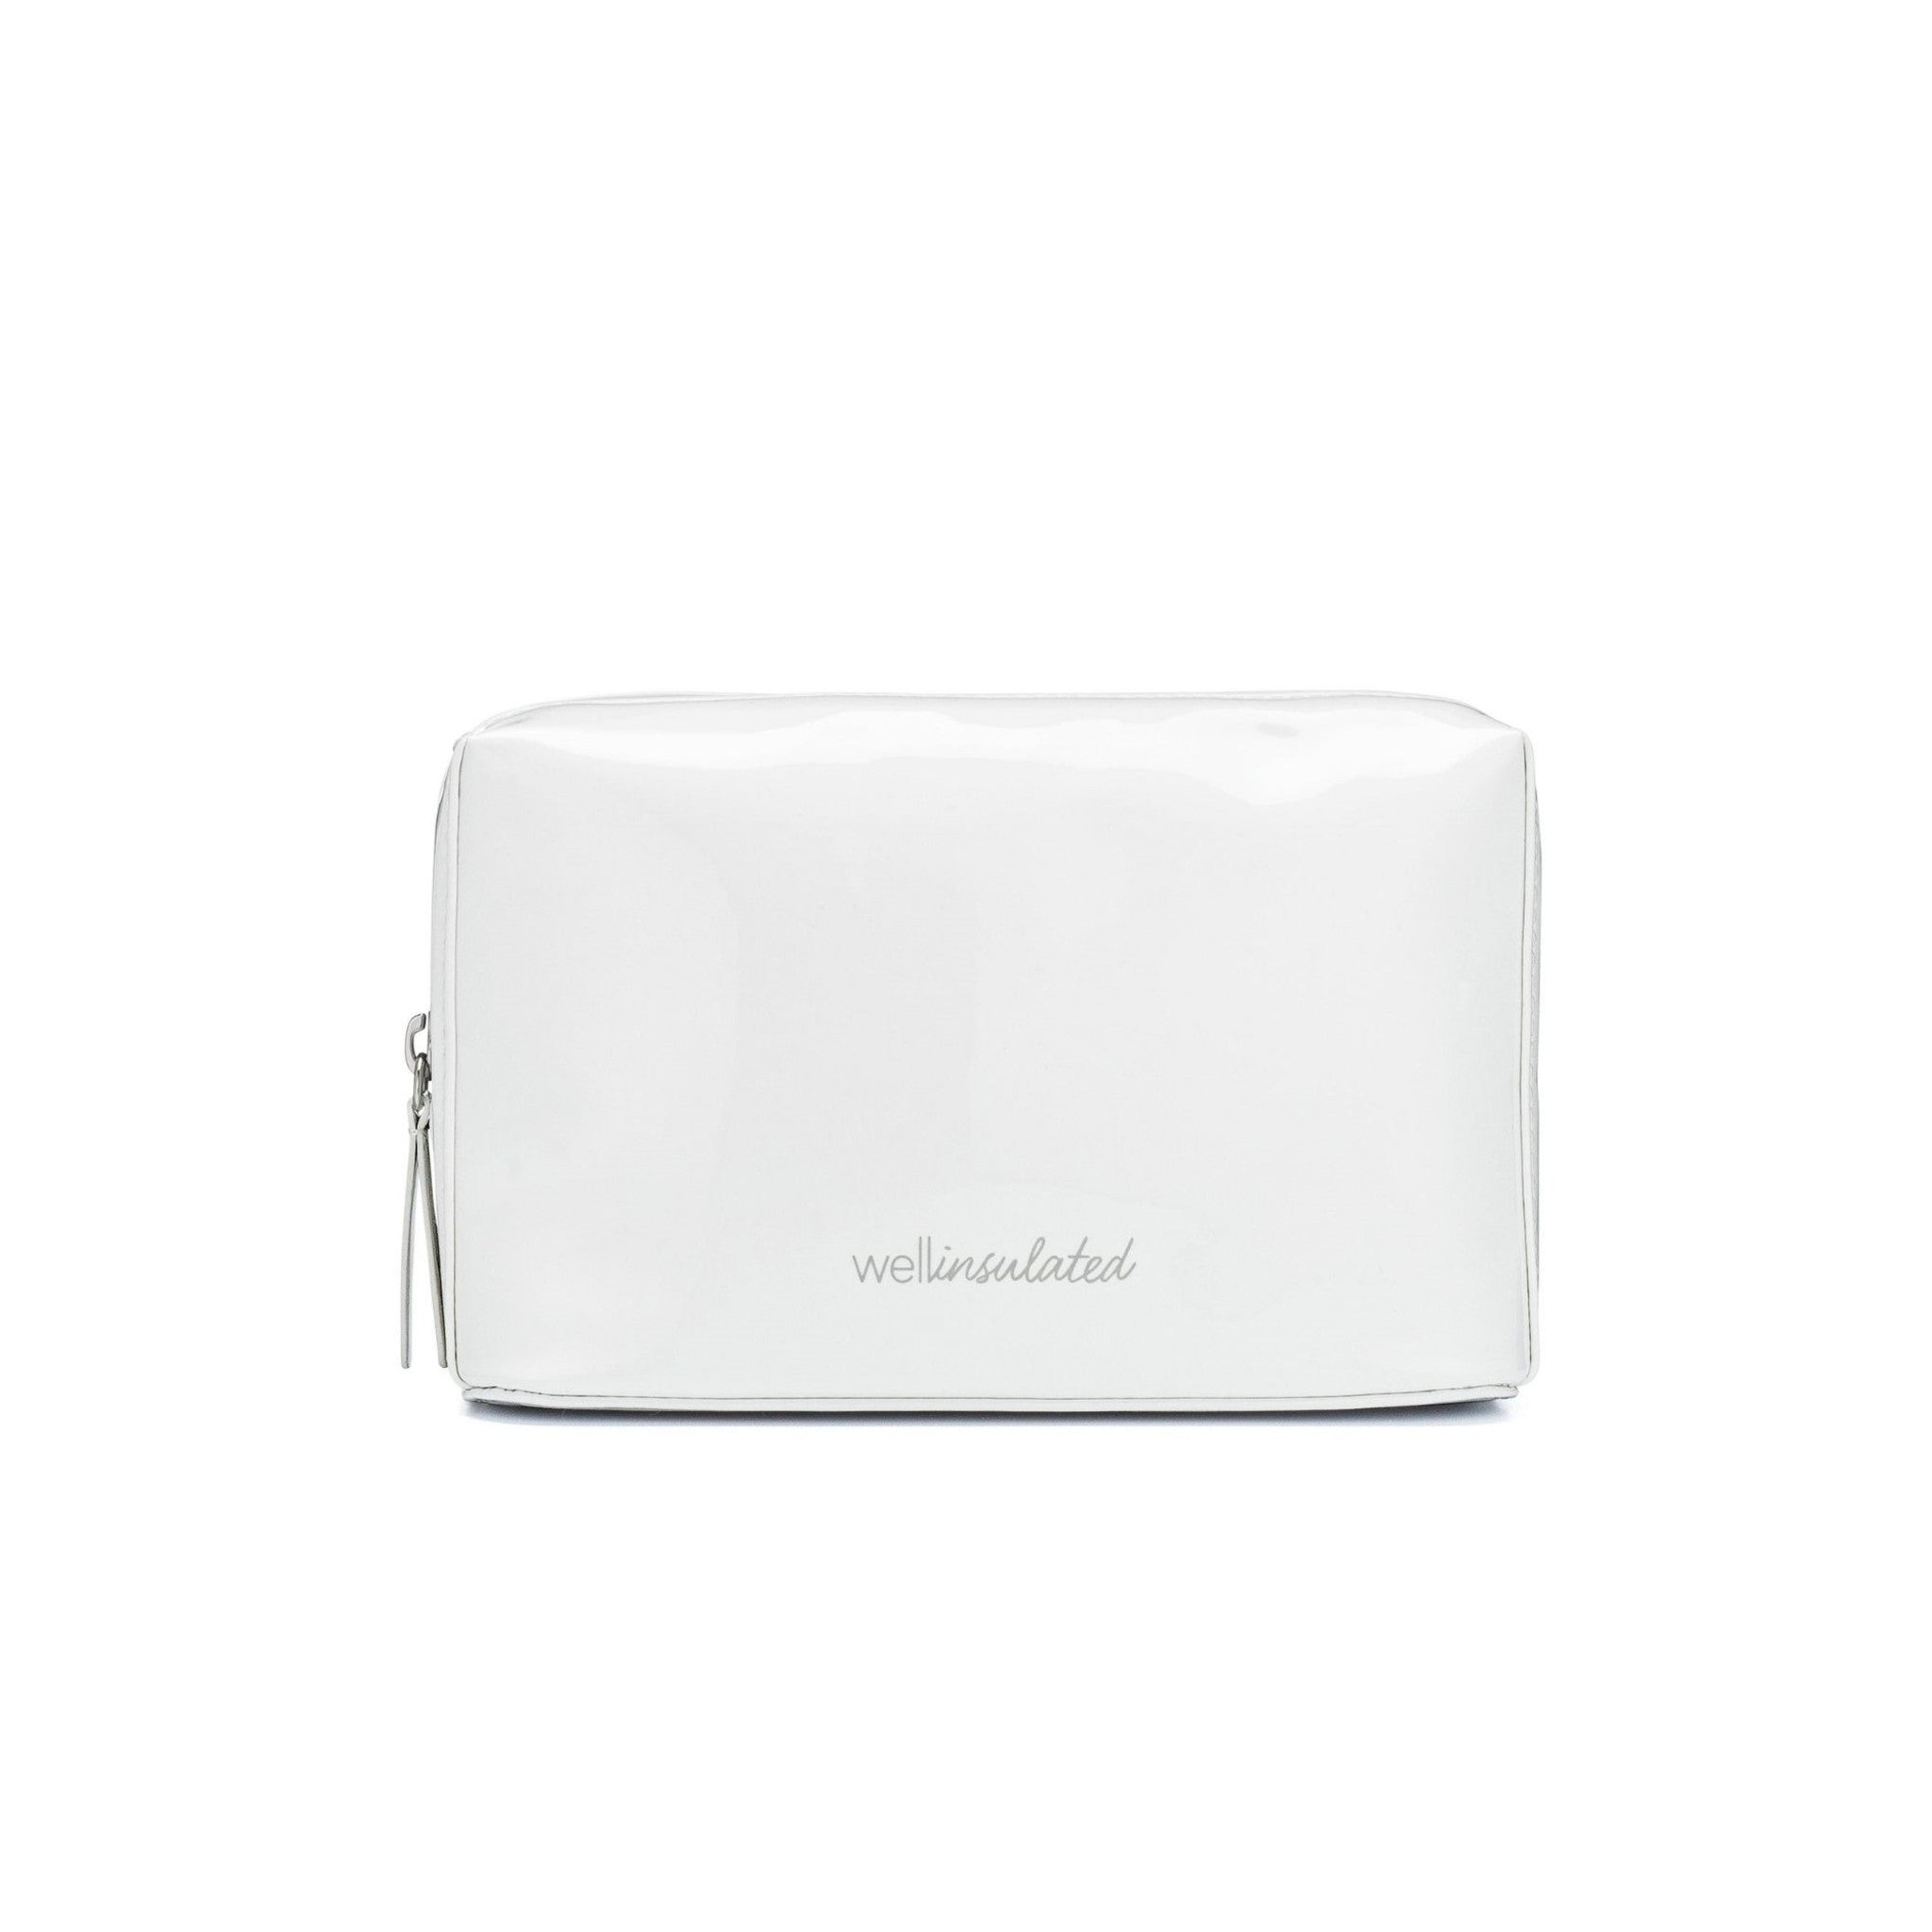 Limited edition Wellinsulated Performance Beauty Bag (Limited Edition) Size variant: Medium main image.